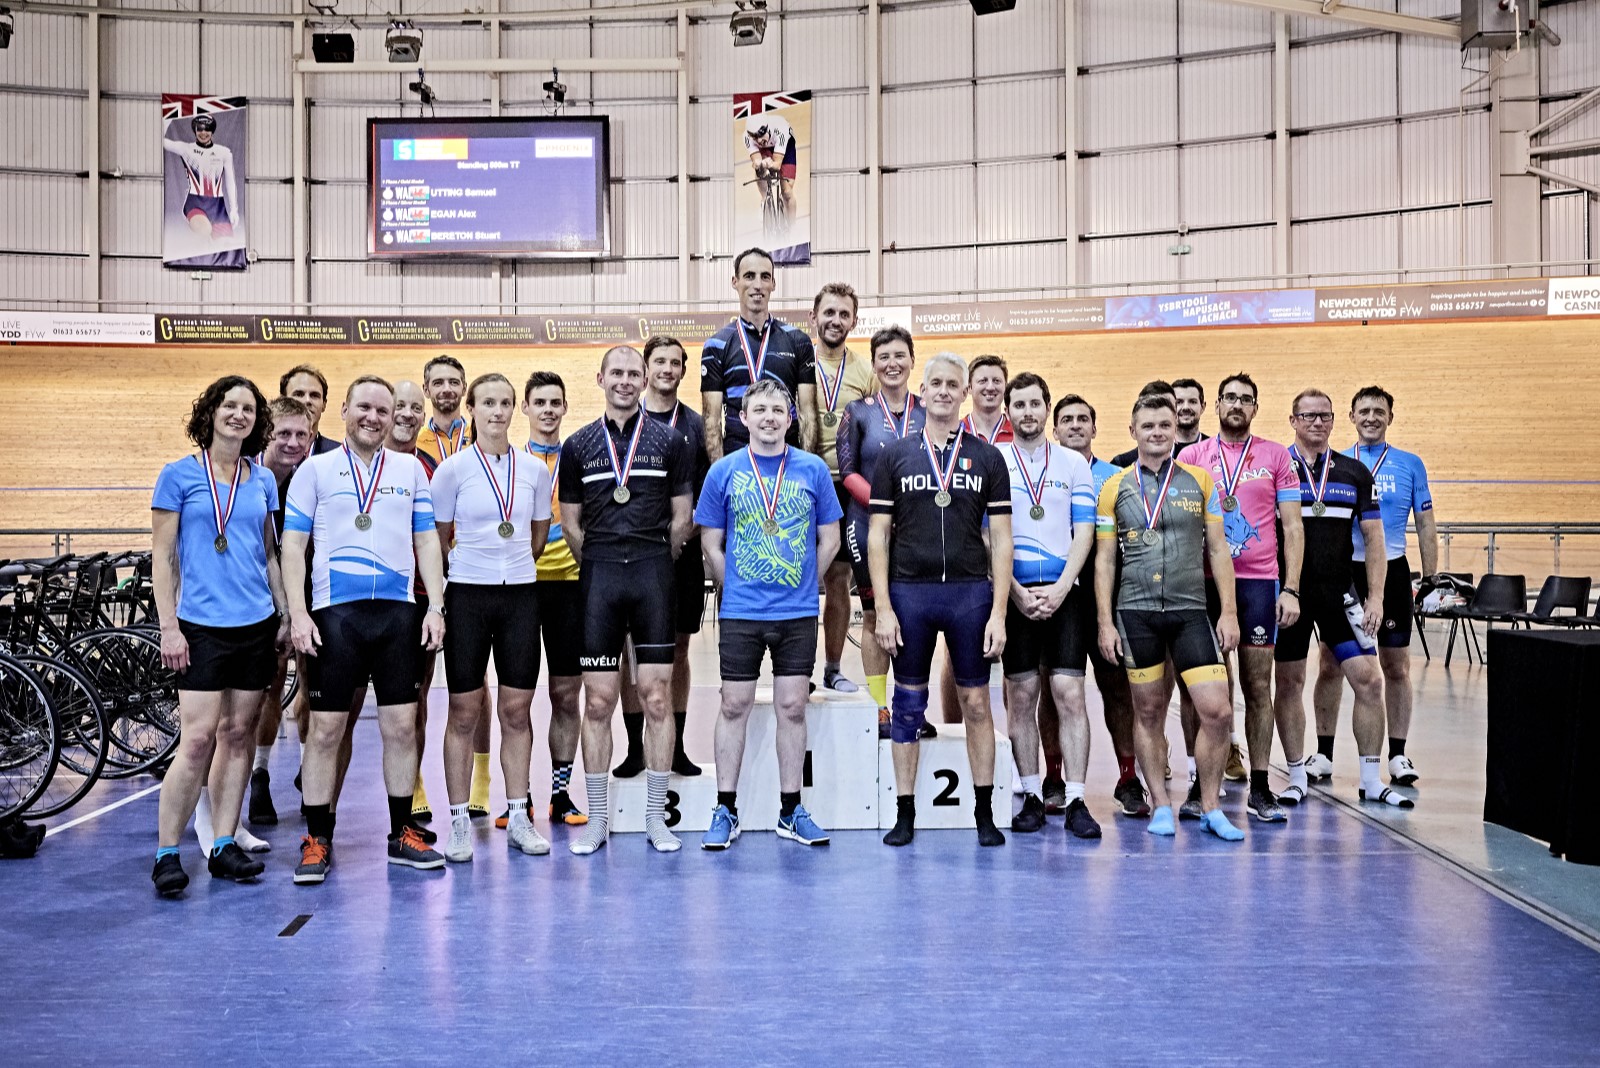 Group of people in cycling kit wearing medals